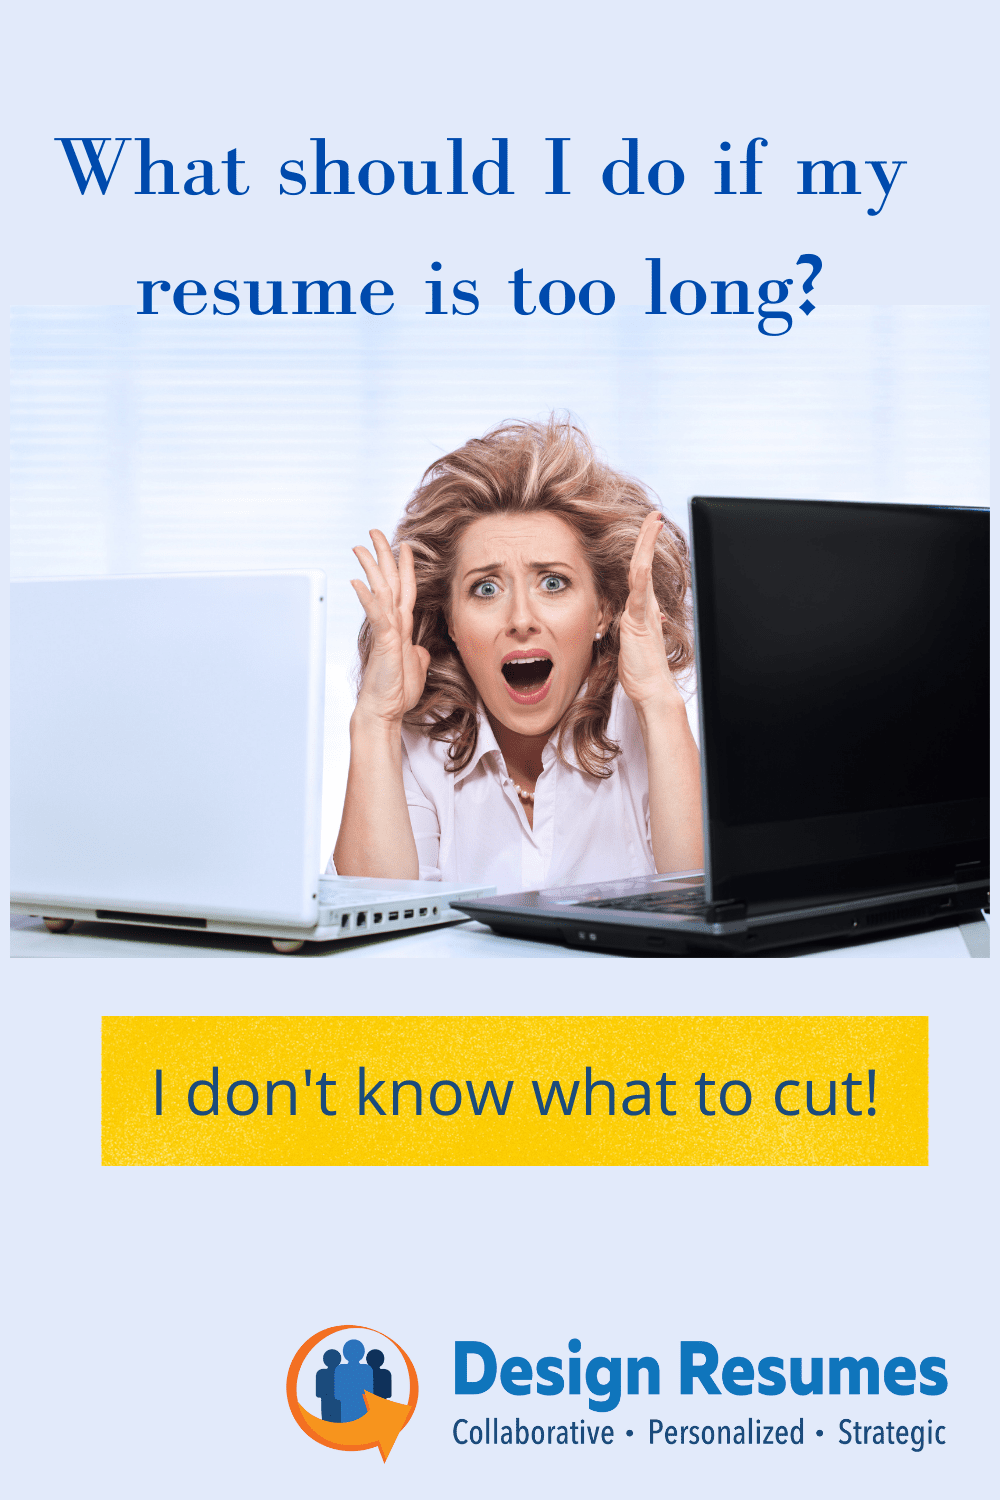 What do I do if my resume is too long?